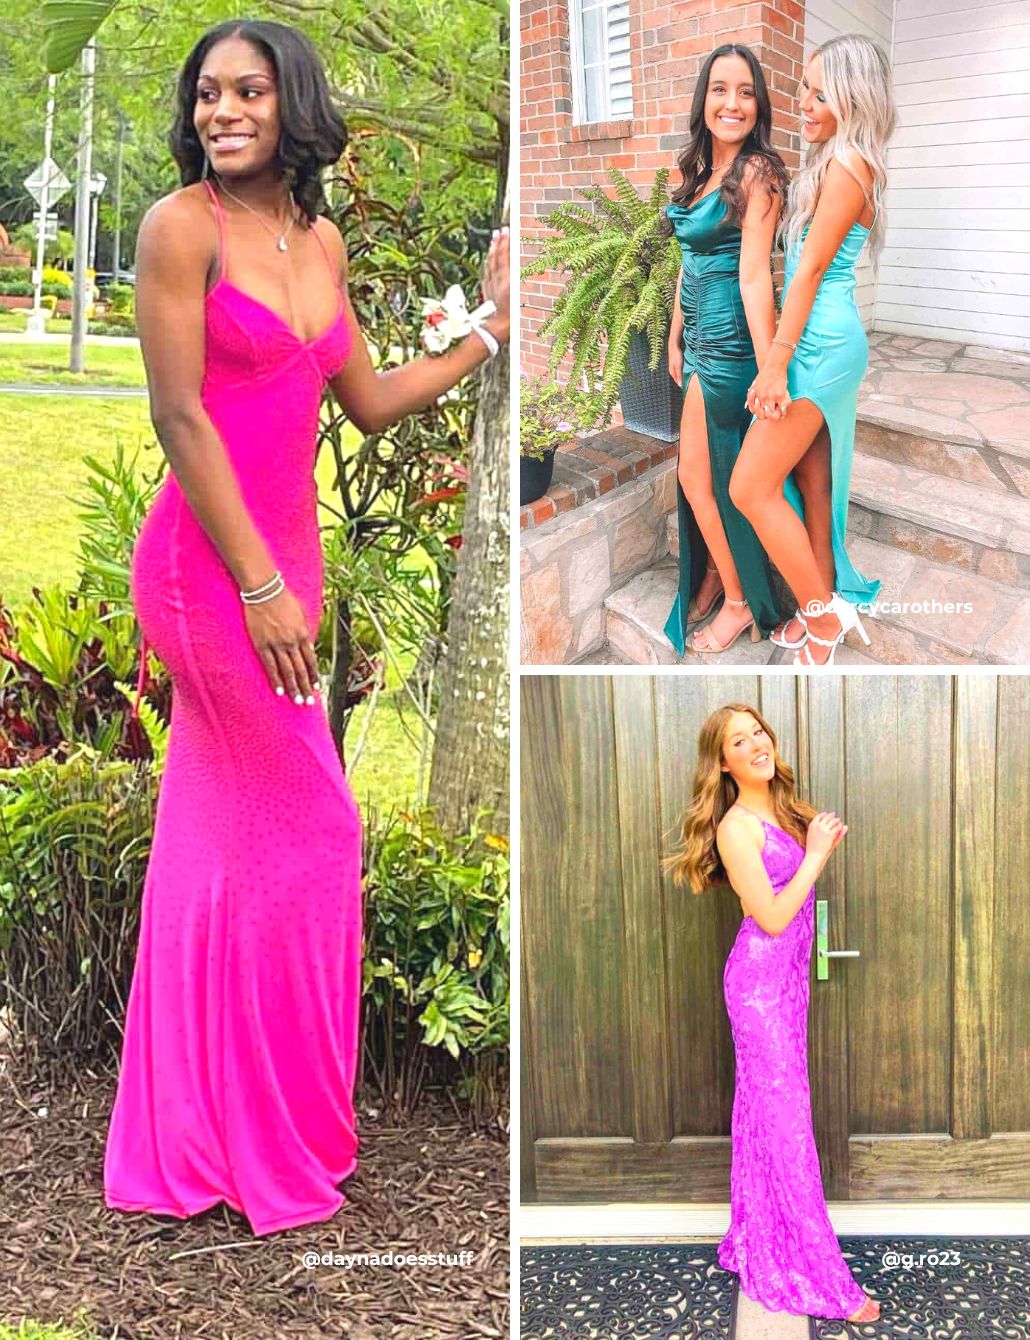 45 Stunning Prom Dress Ideas That'll Make You Swoon